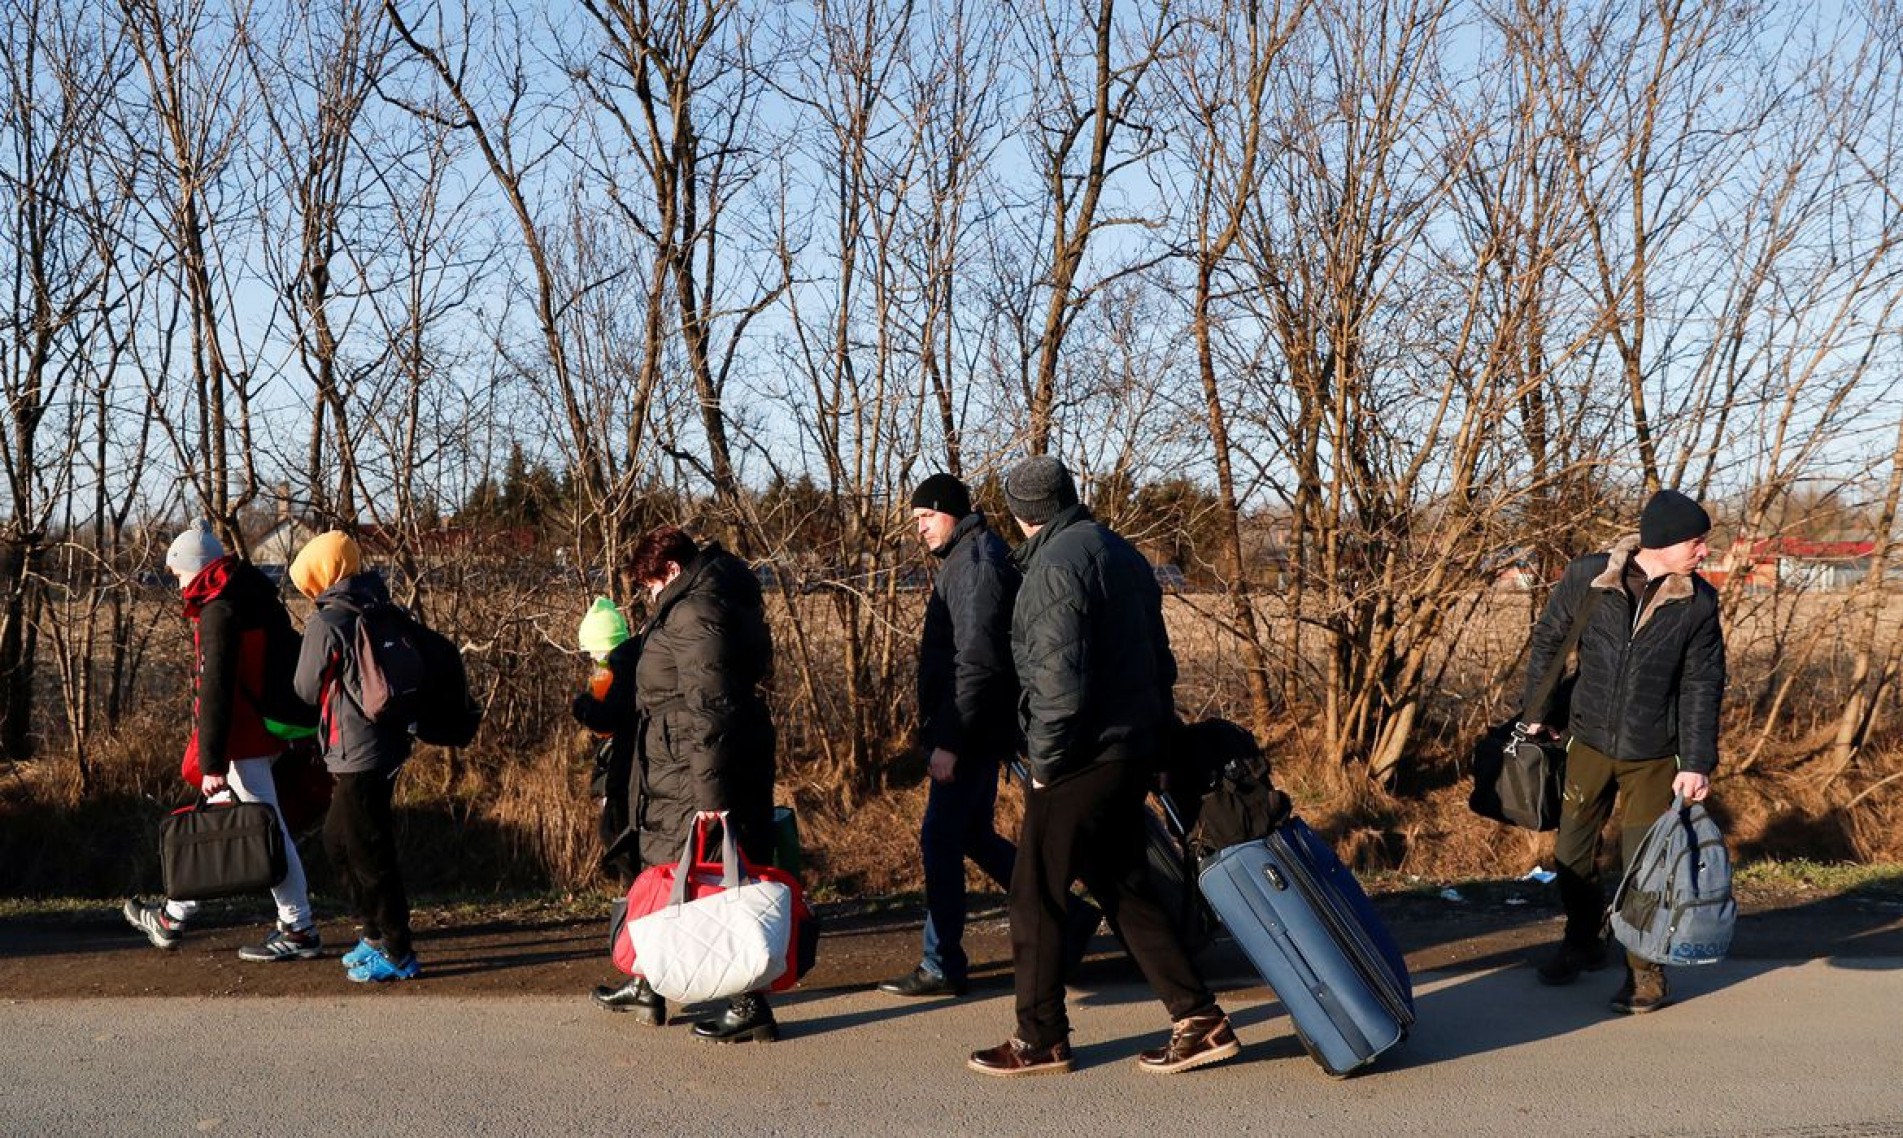  People carry their luggage as they flee from Ukraine at the Hungarian-Ukrainian border after Russian President Vladimir Putin authorized a military operation, in Tiszabecs, Hungary, February 24, 2022. REUTERS/Bernadett Szabo..
    